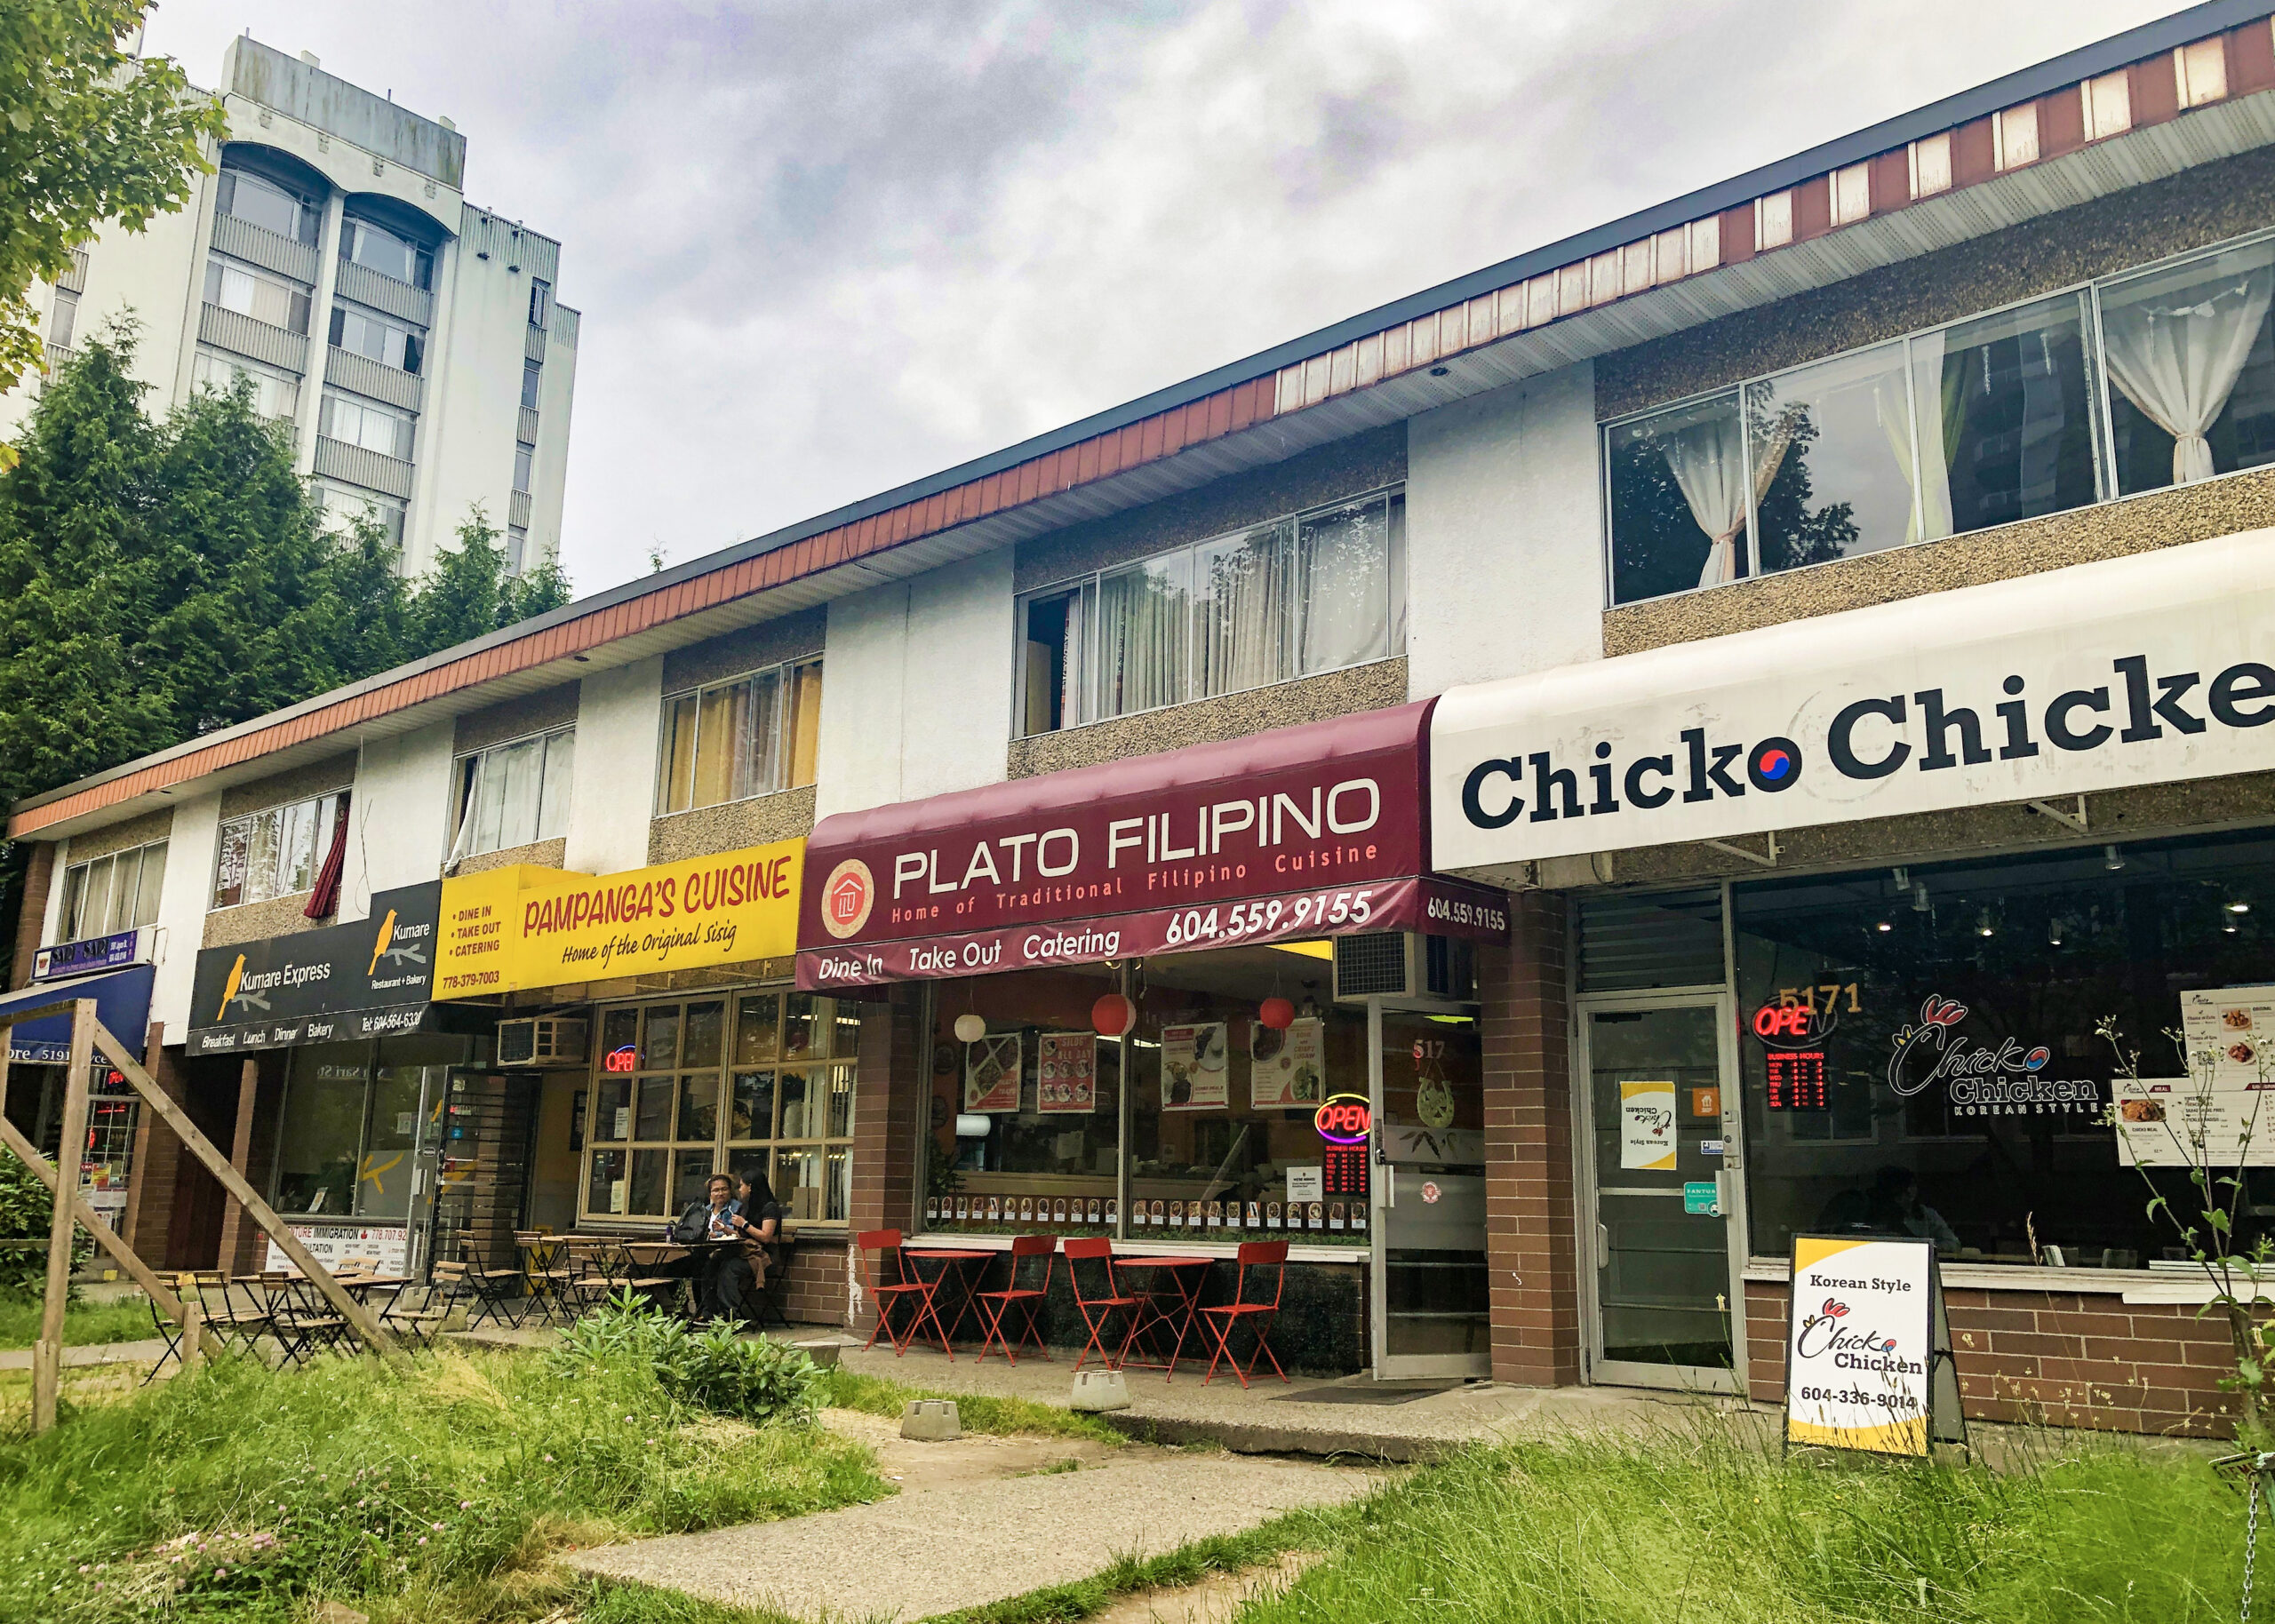 The photo is of the businesses on Joyce Street. Plato Filipino's store front is featured.